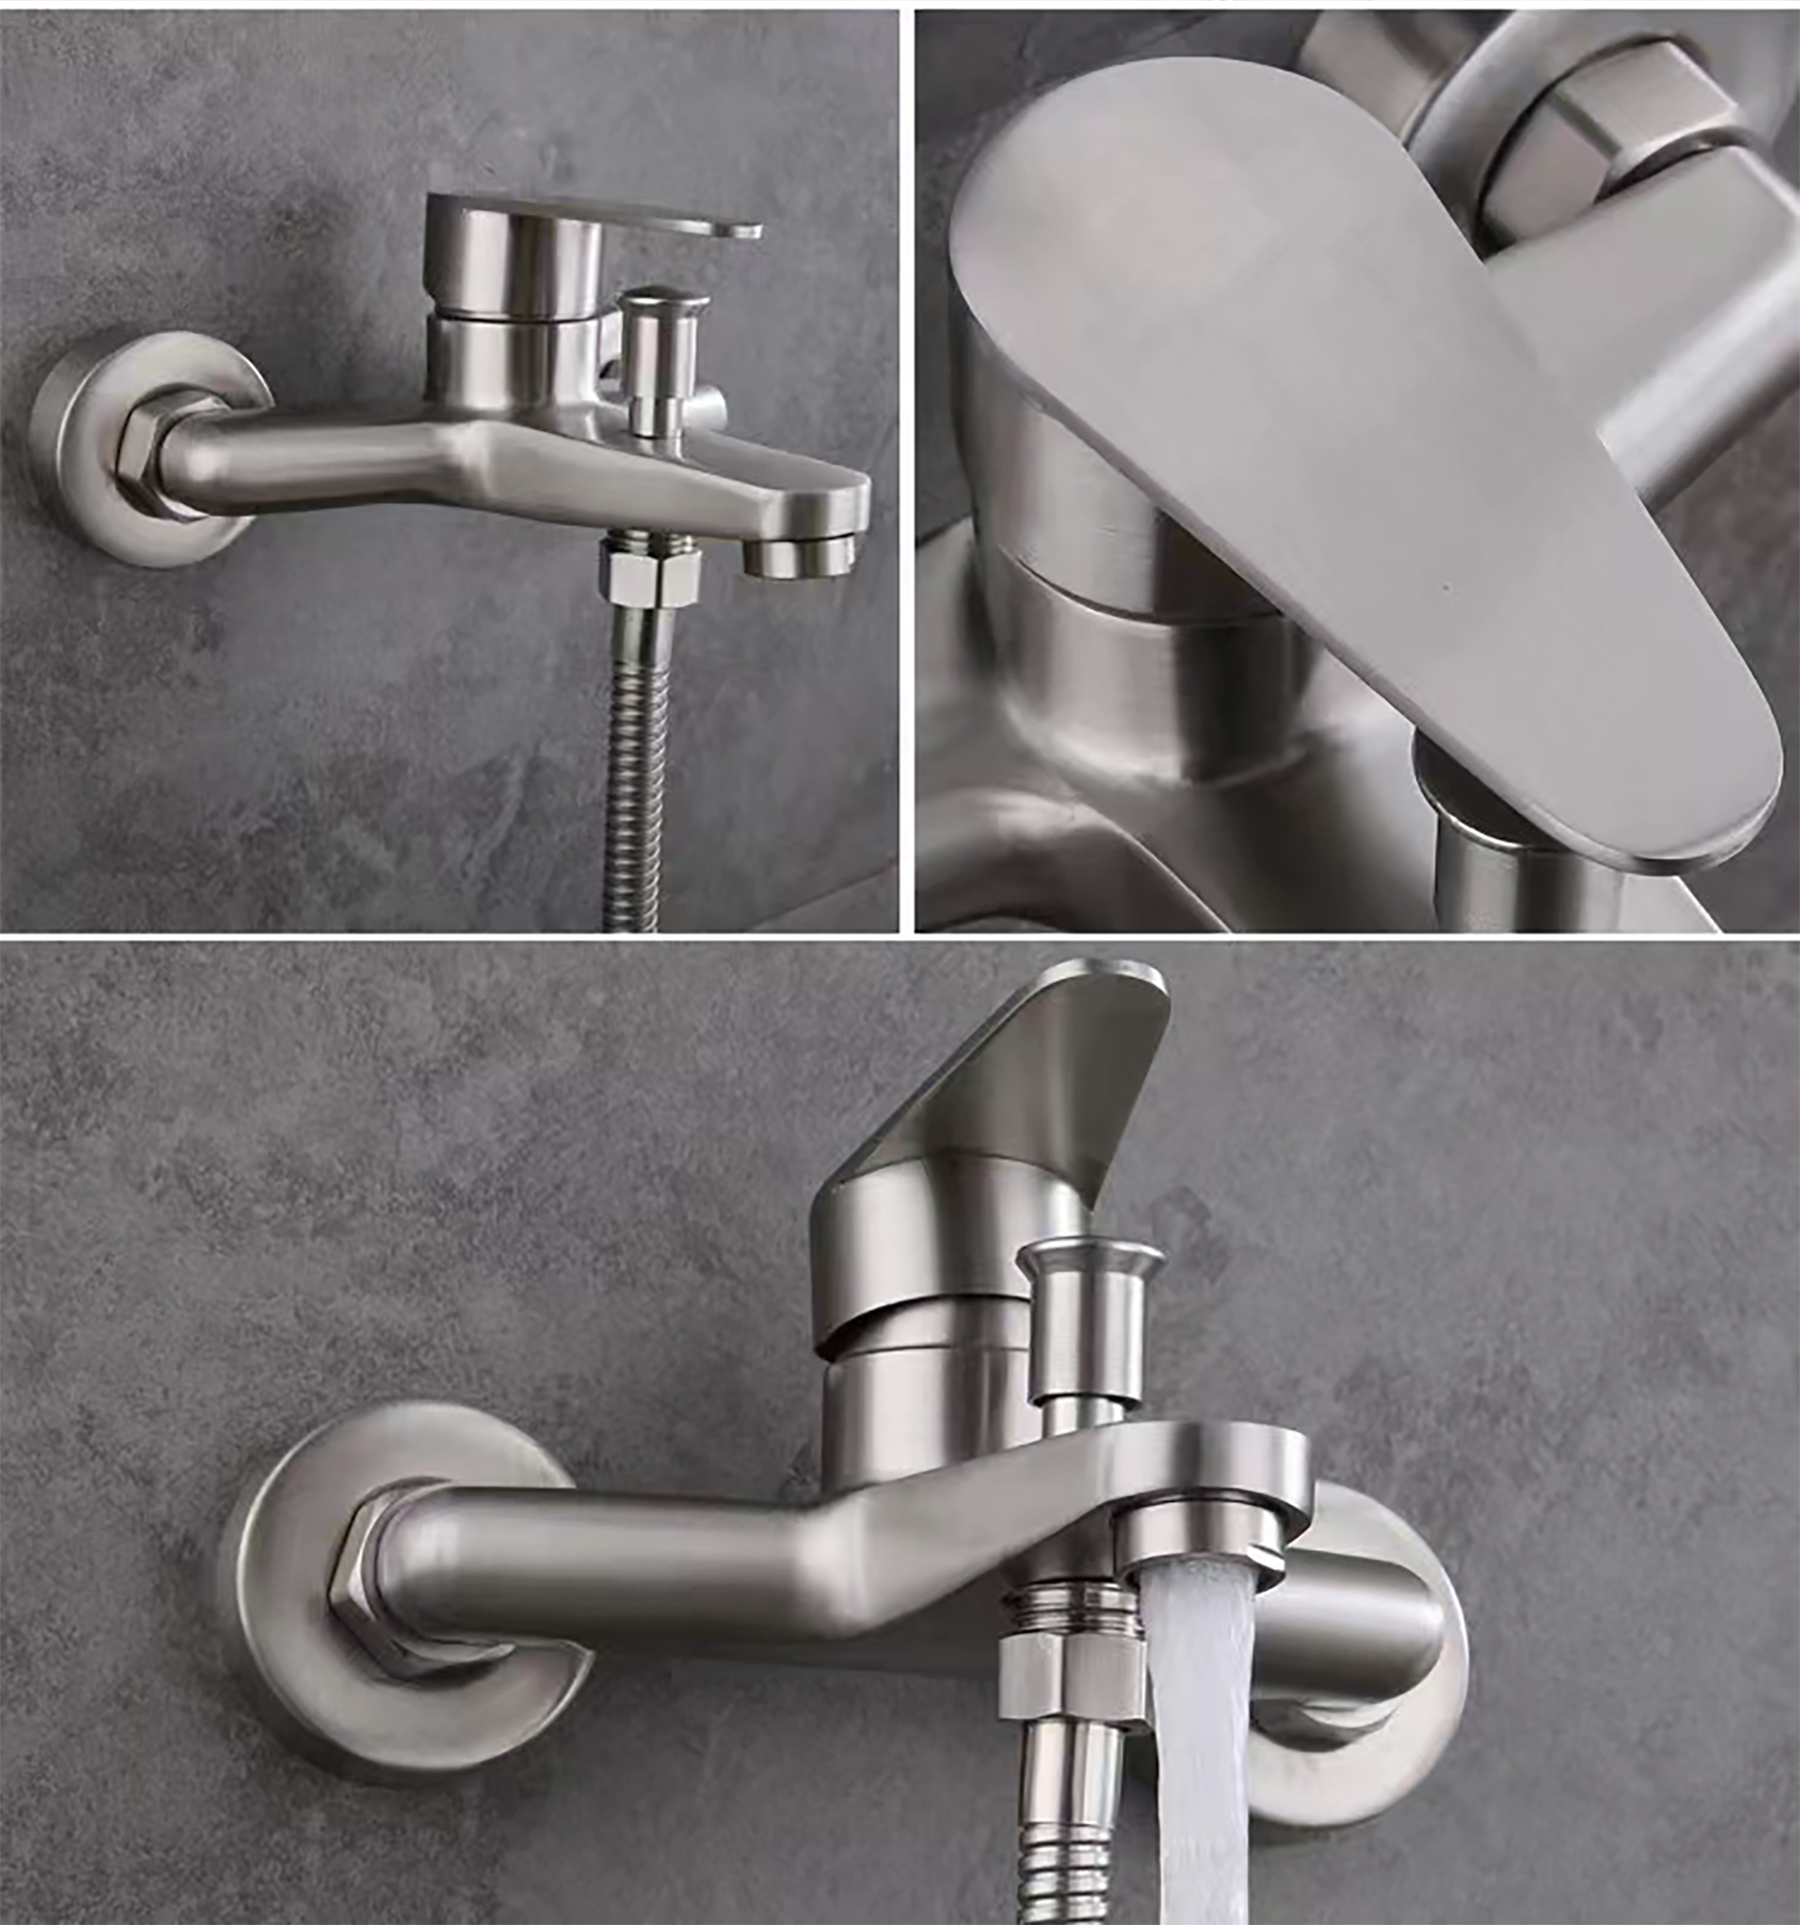 Stainless steel bathroom concealed triple hot and cold faucet